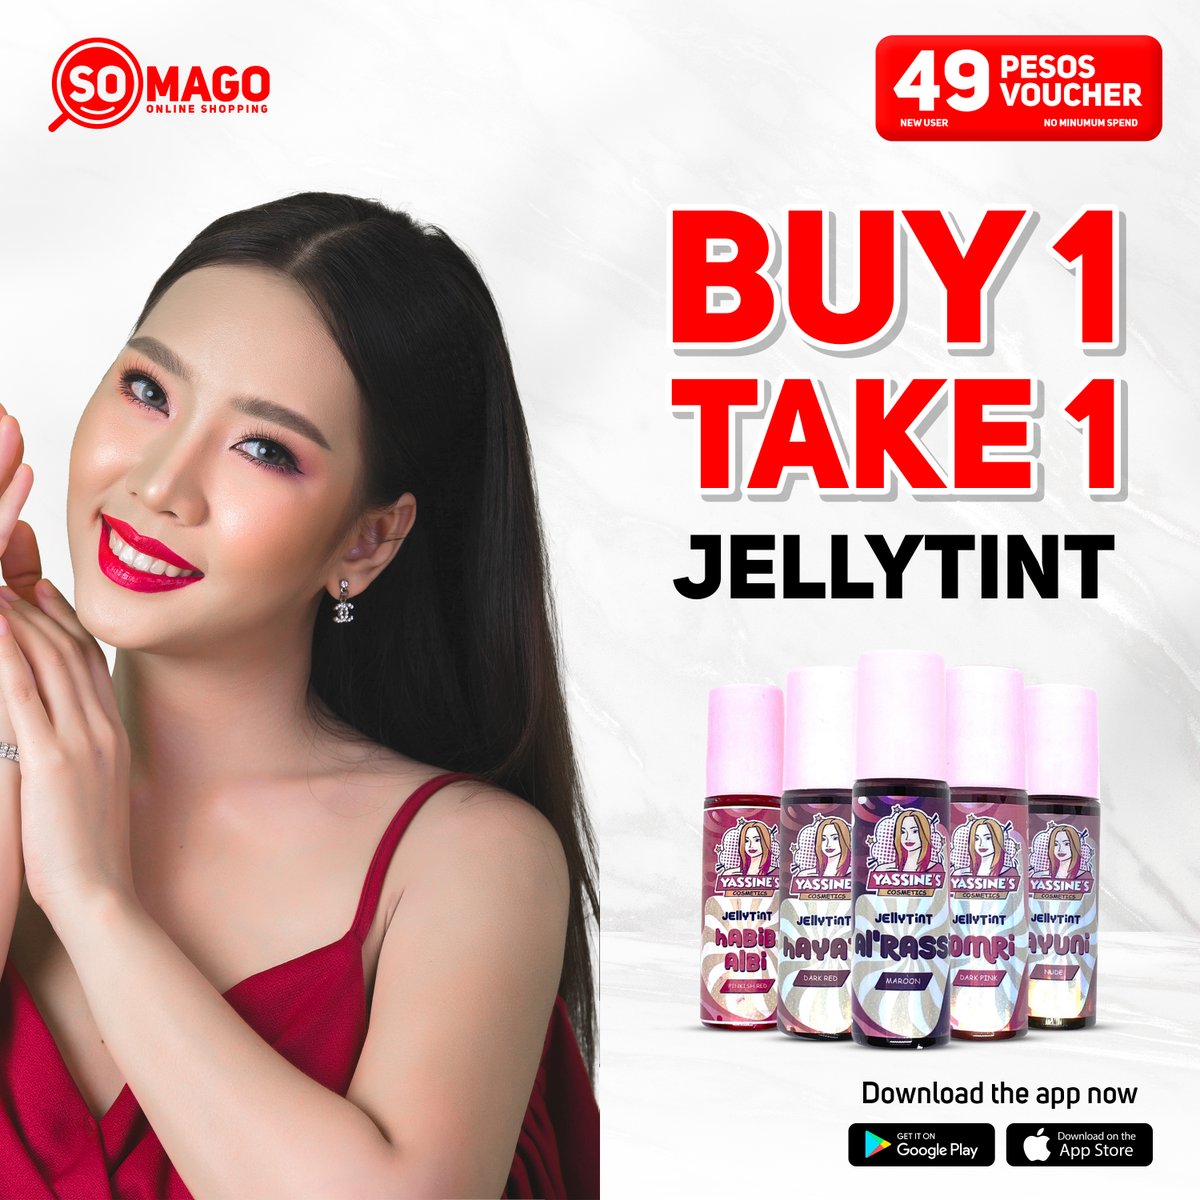 💖 Para sa favorite shade on your lips and cheek beshy
🚚 Cash-On-Delivery na hassle FREE pa!
💸PLUS P49 Vouchers, eWallet PRIZES & MORE!

Download the App HERE: app.somago.com.ph

📲✨ #Buy1Take1 #Jellytint #OnlineShopping #BeautyDeals